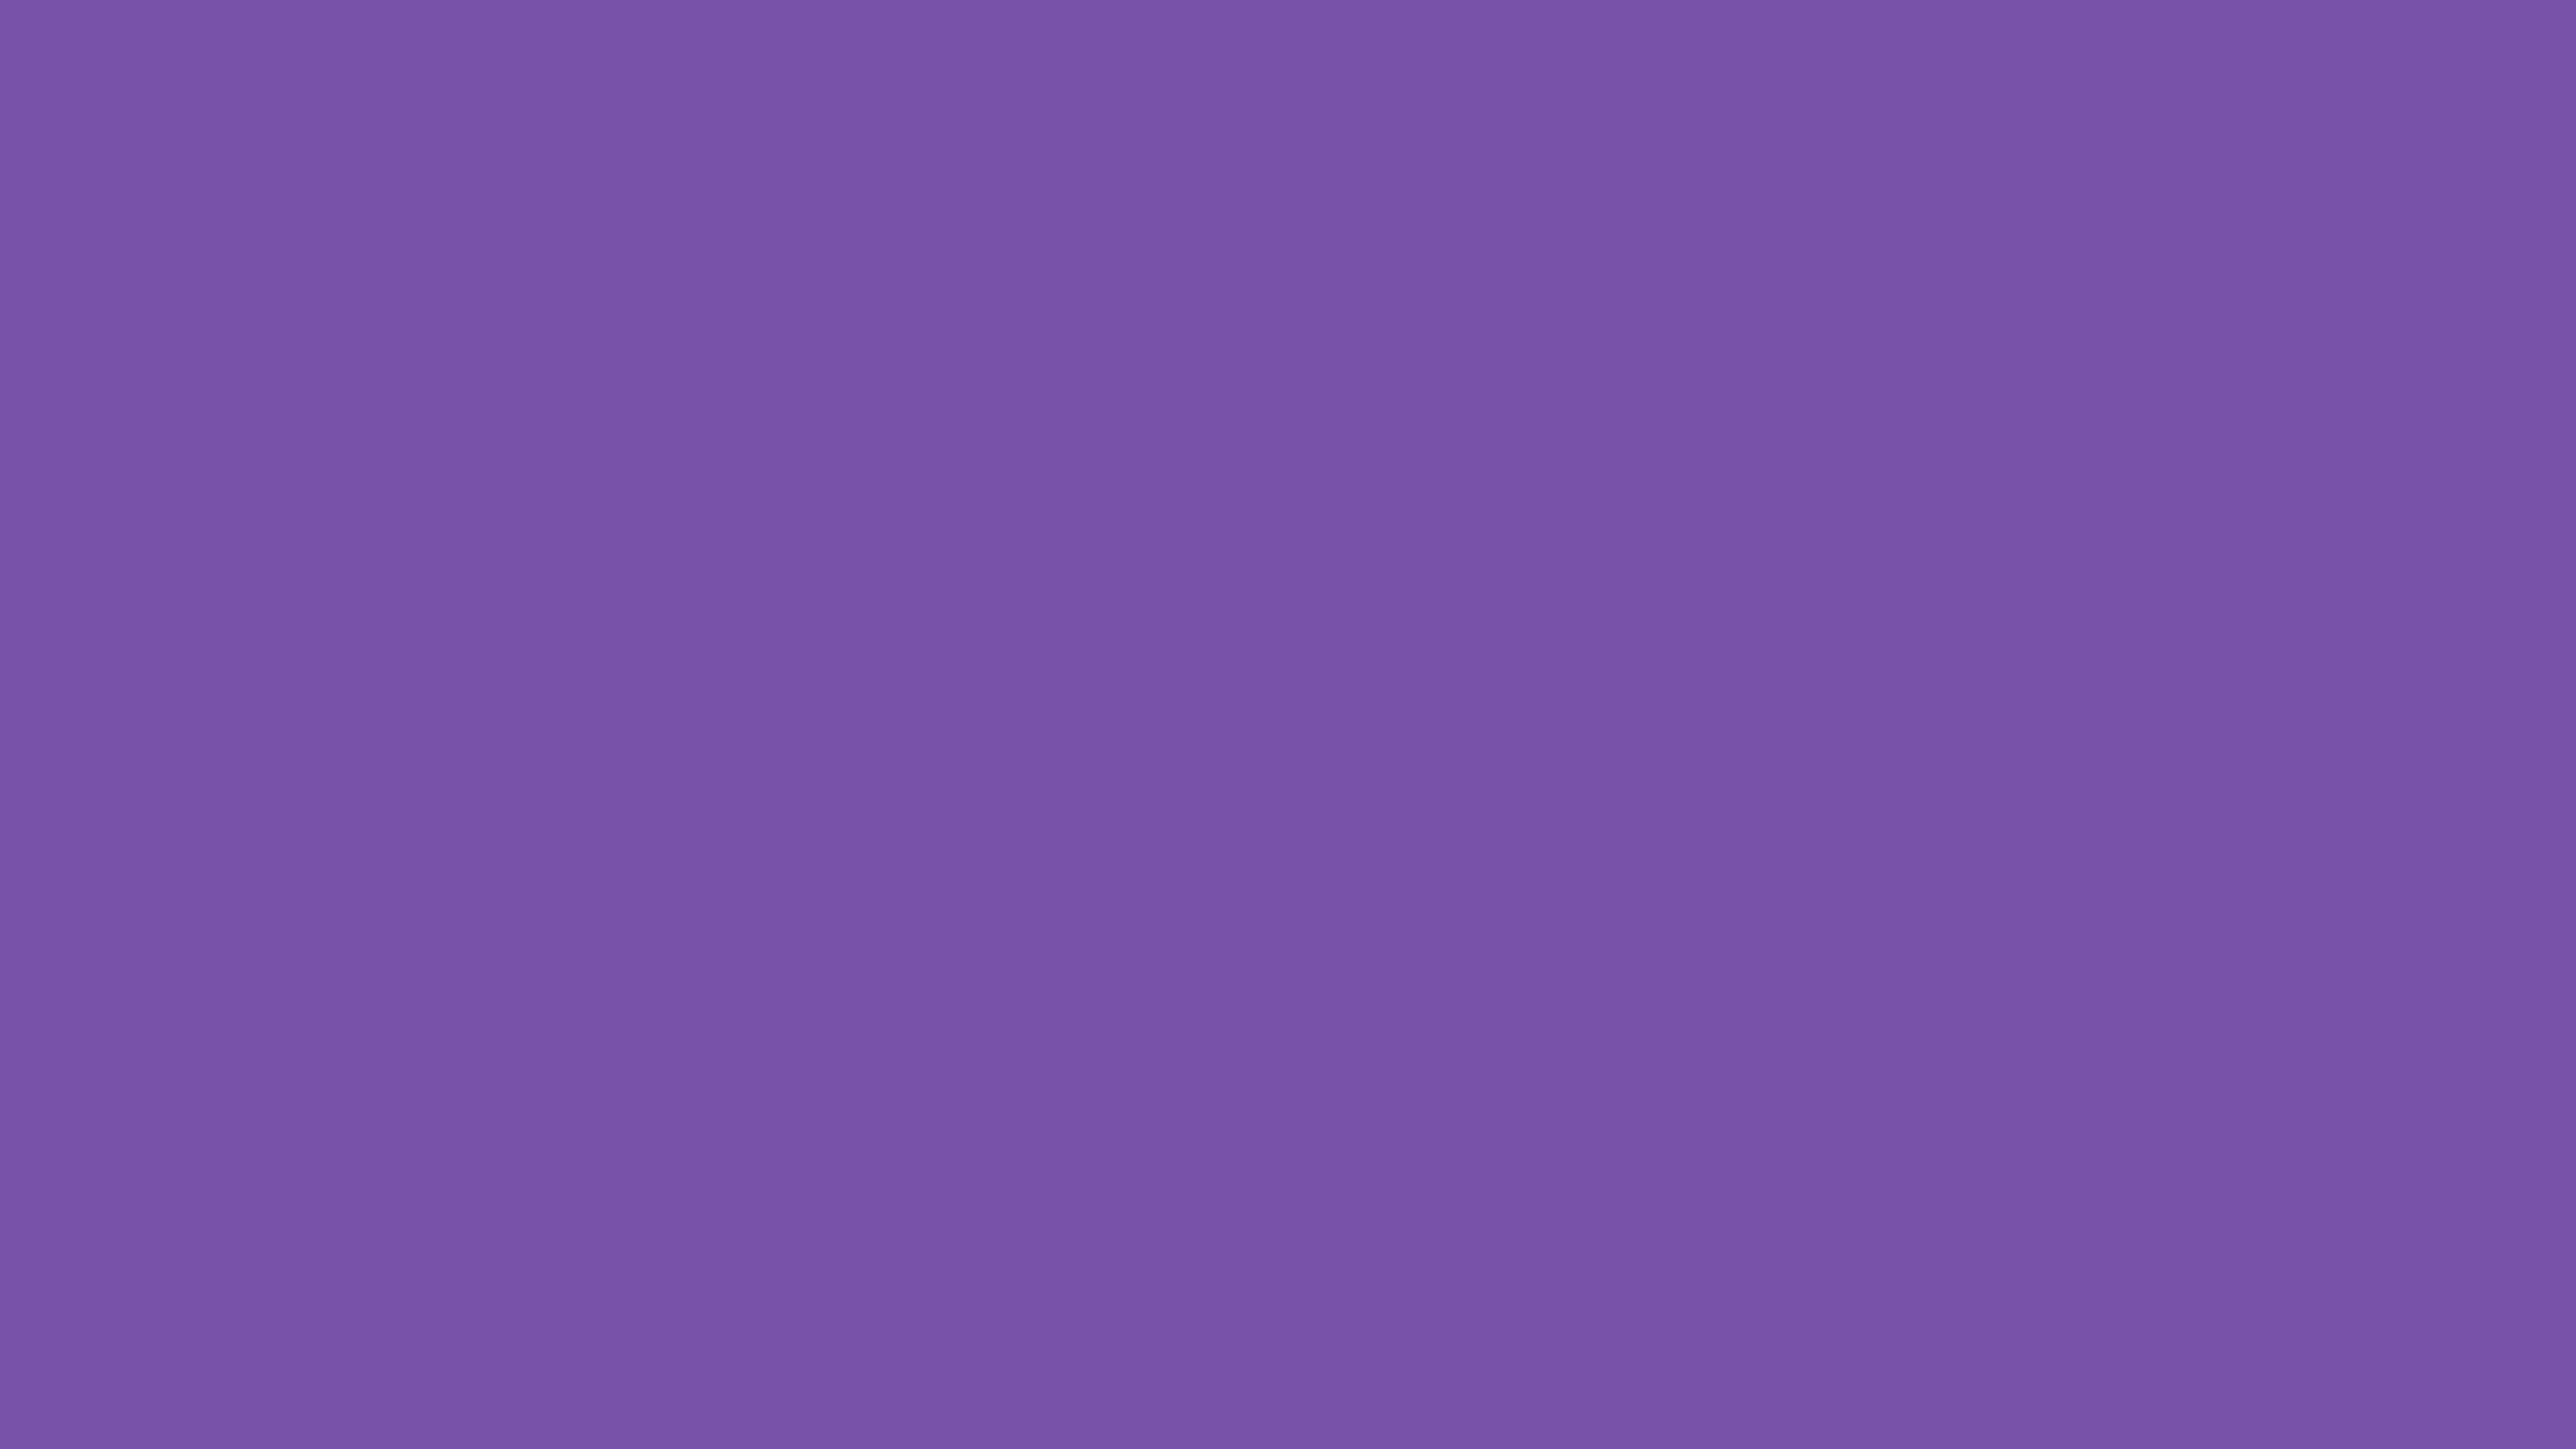 7680x4320 Royal Purple Solid Color Background